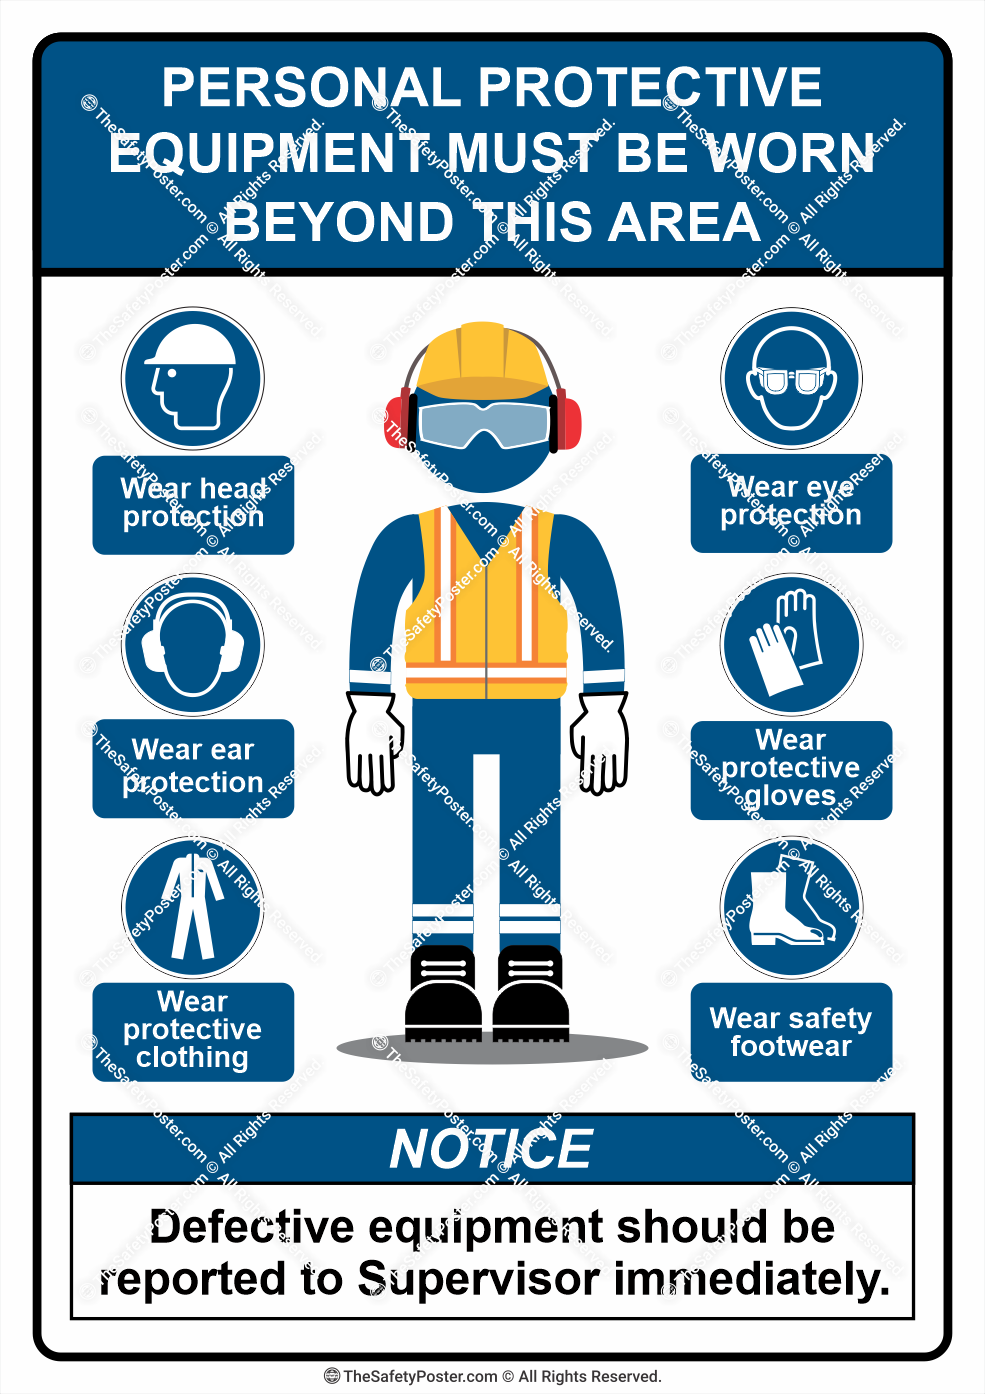 ppe-must-be-worn-personal-protective-equipment-ppe-safety-ppe